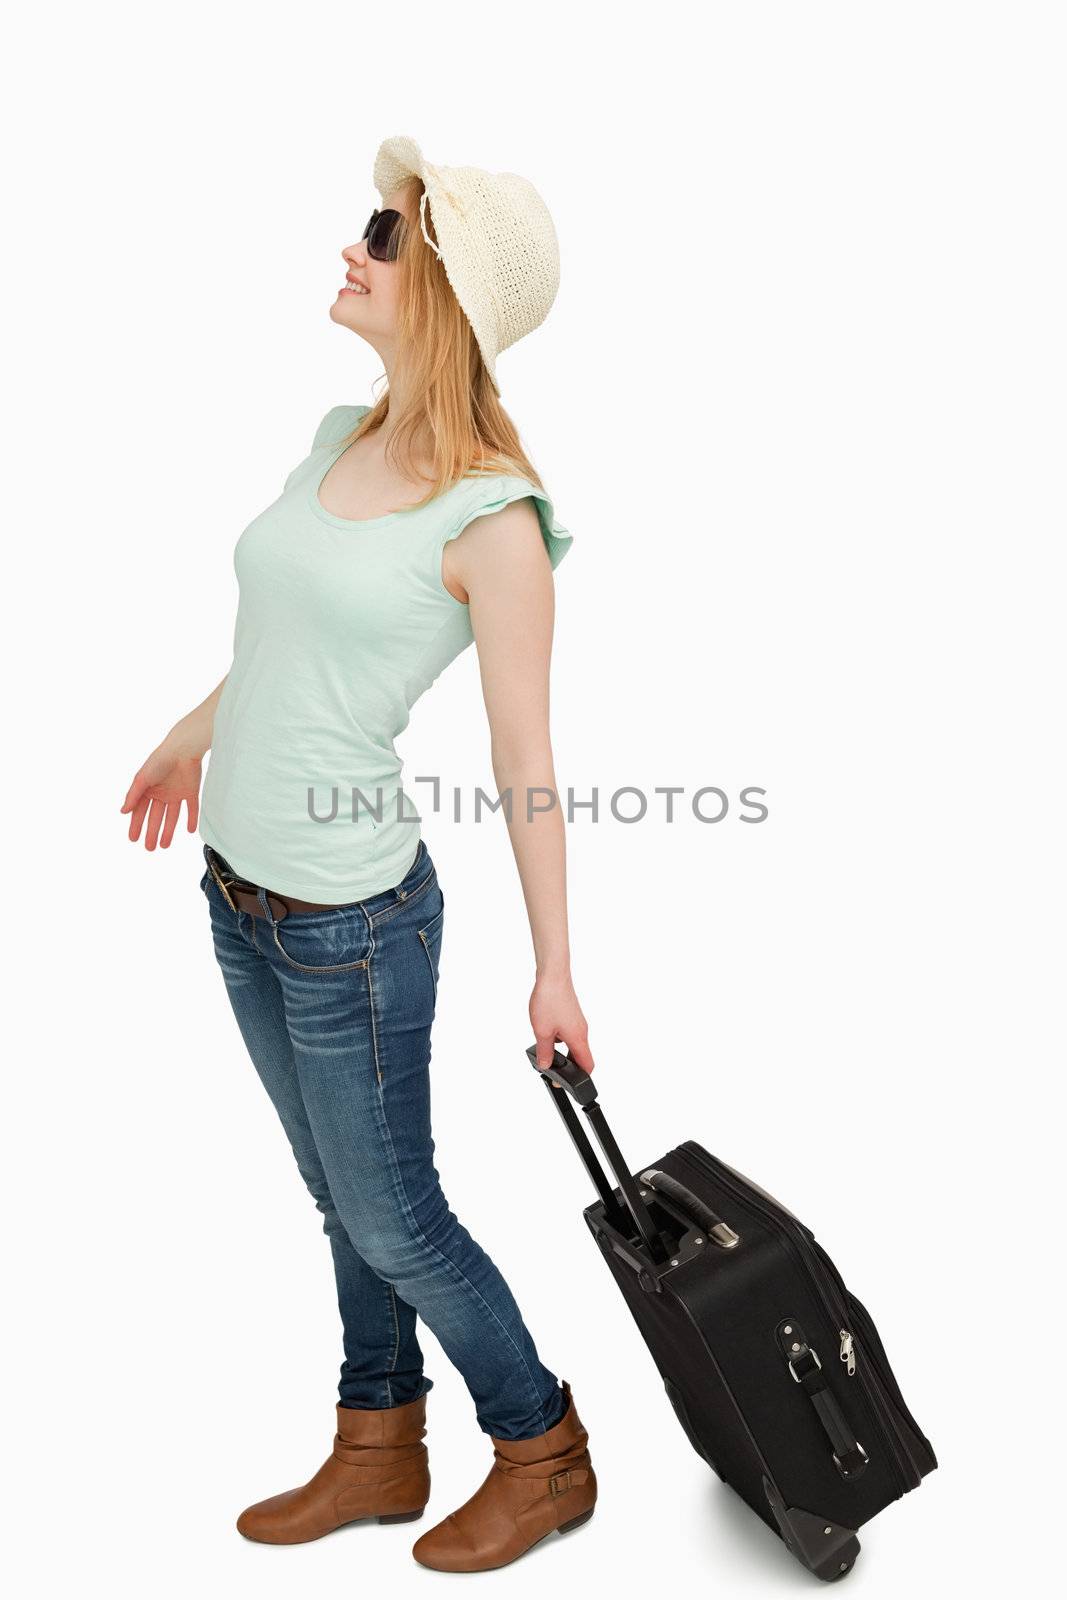 Young woman smiling while holding a suitcase against white background